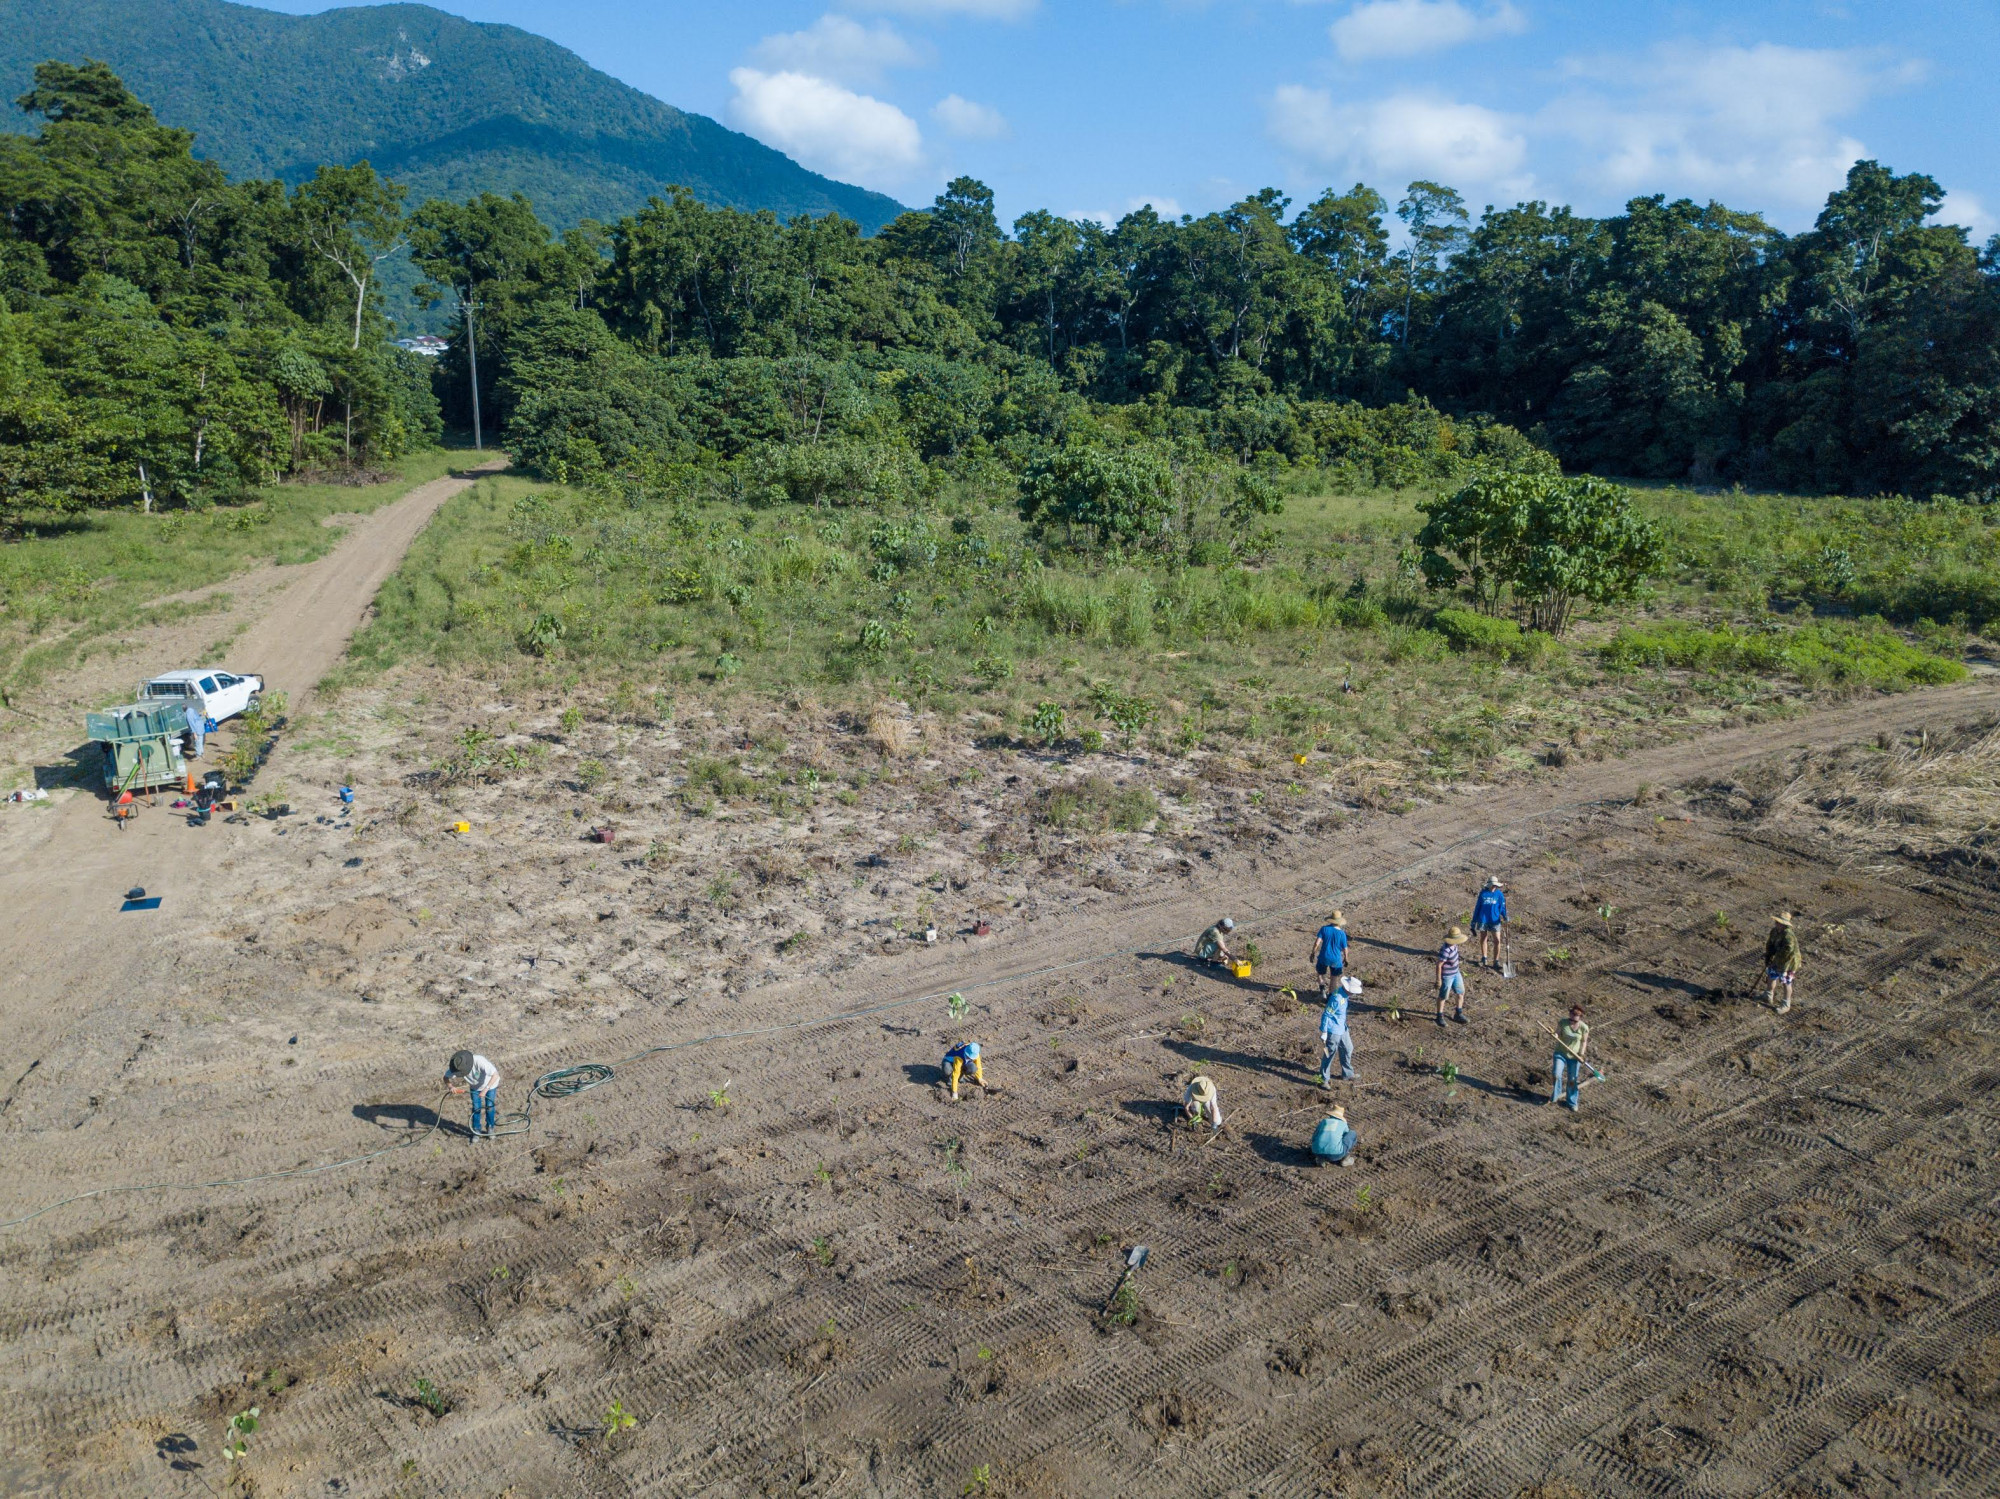 Treeforce volunteers planting trees at Radjirr Radjirr in 2018. Two years on, this Treeforce planting is now a forest, almost as tall as the trees in the middle distance, planted five years ago. Photo: Robert Gesink